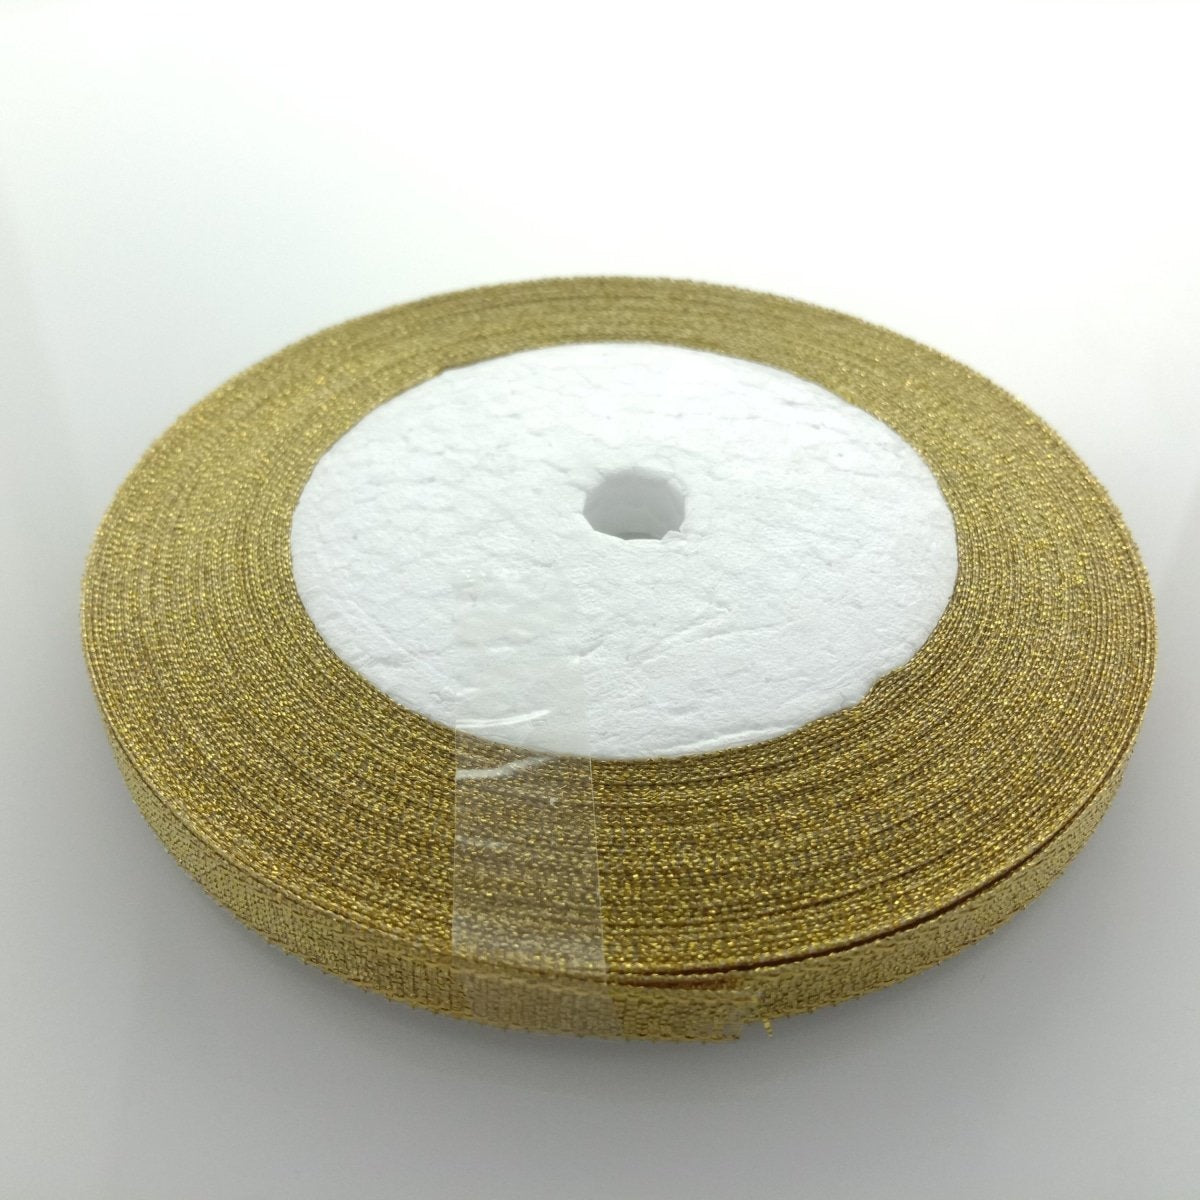 6Mm-50Mm Gold Silver Ribbon 22M Wedding Christmas Decoration Gift Wrapping 6Mm Ribbons